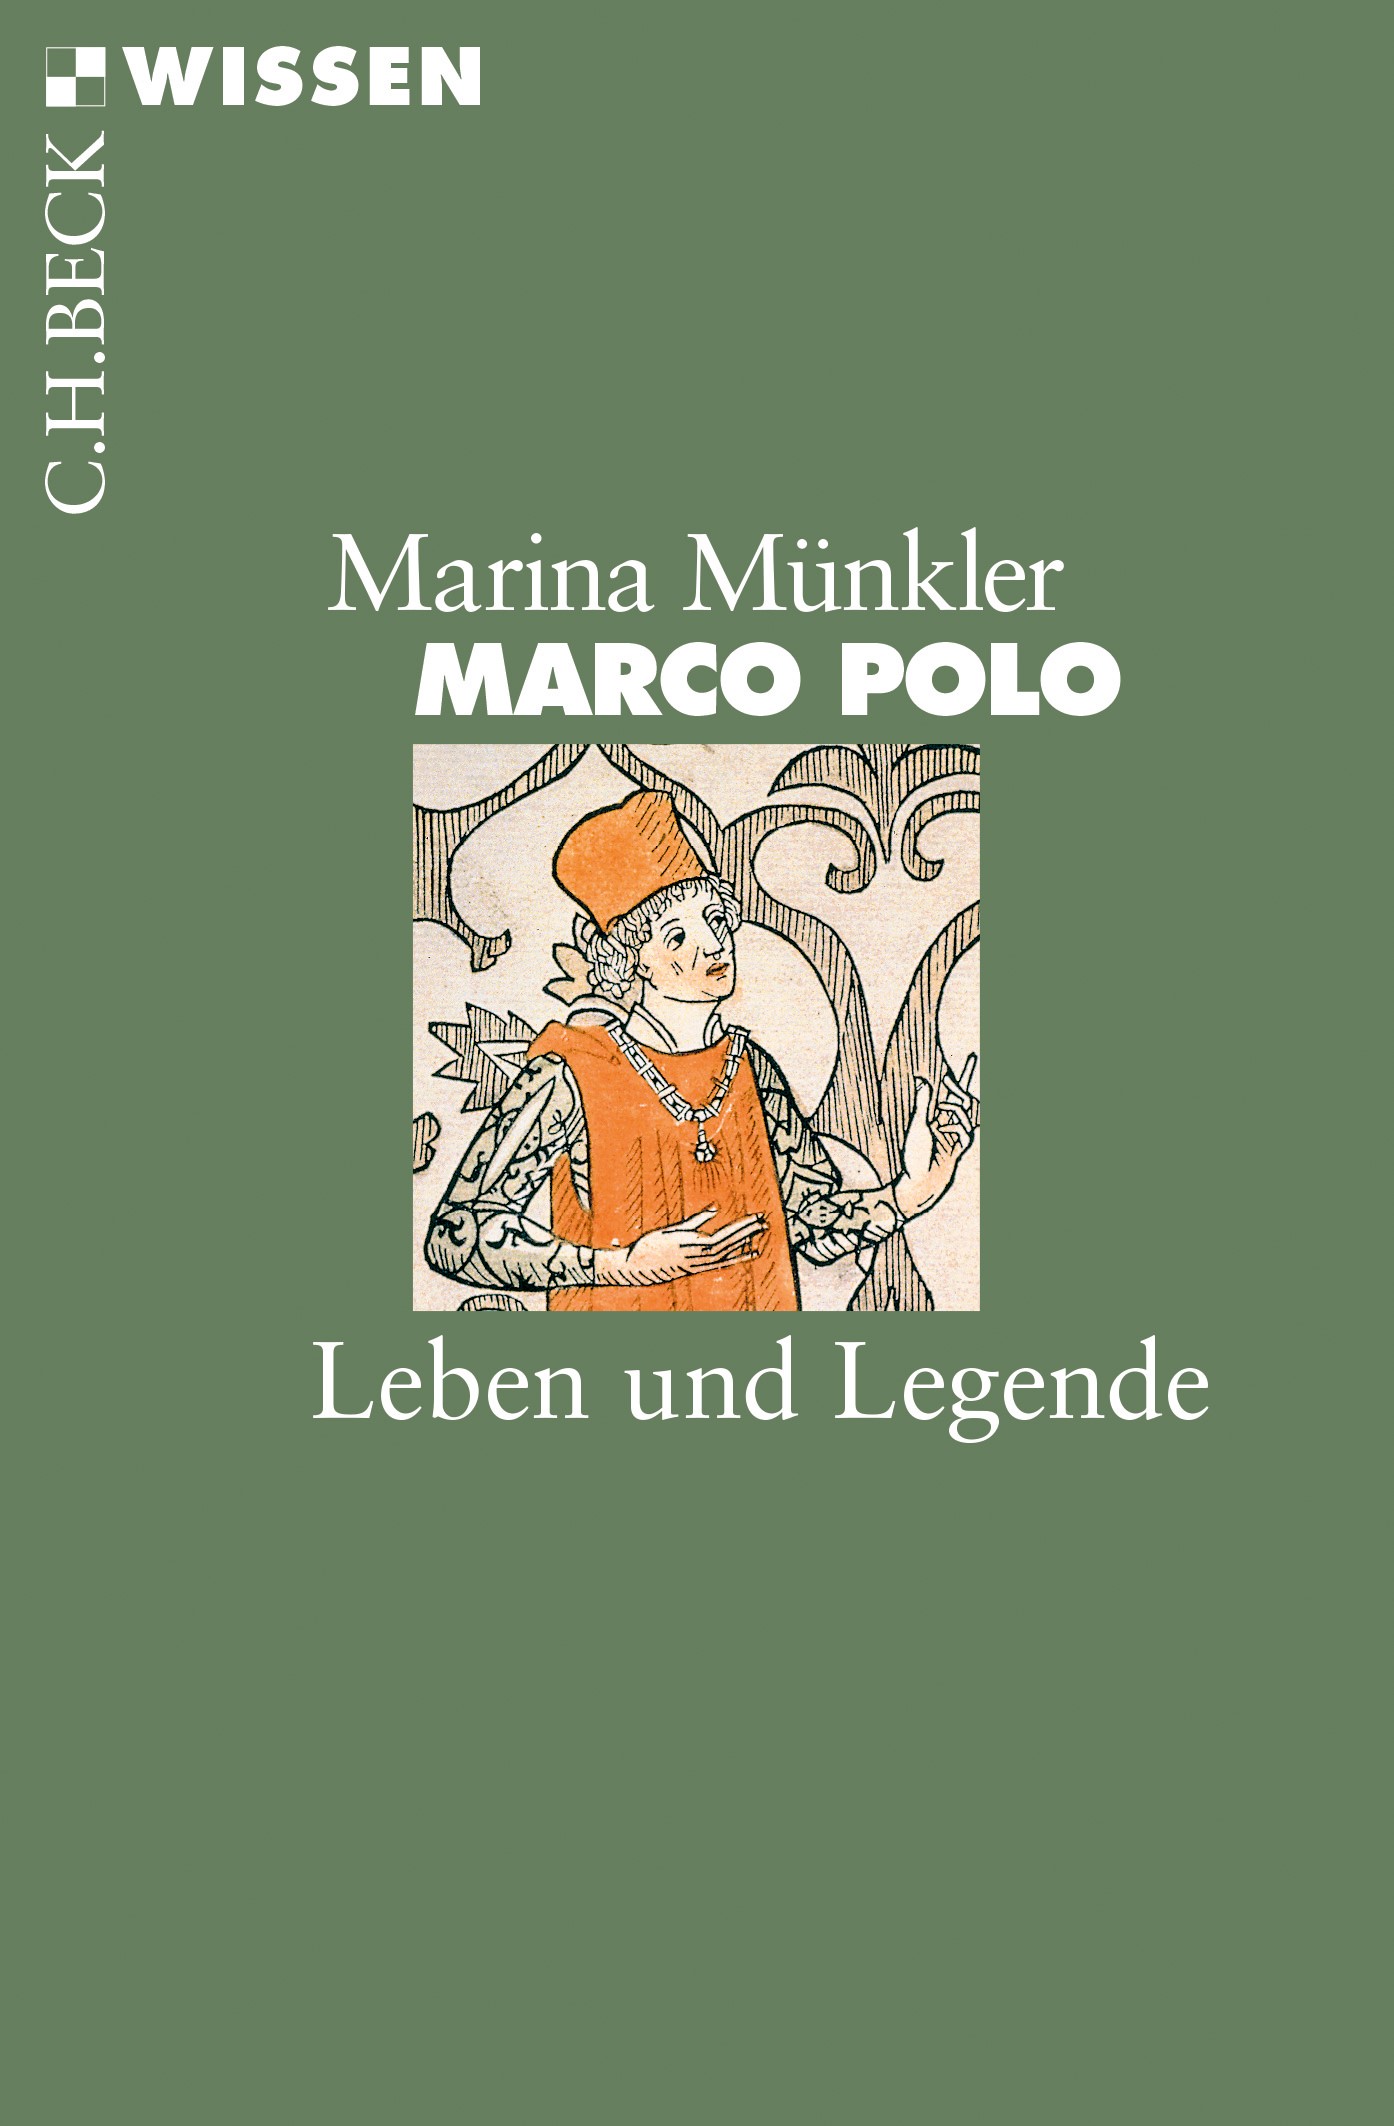 Cover: Münkler, Marina, Marco Polo